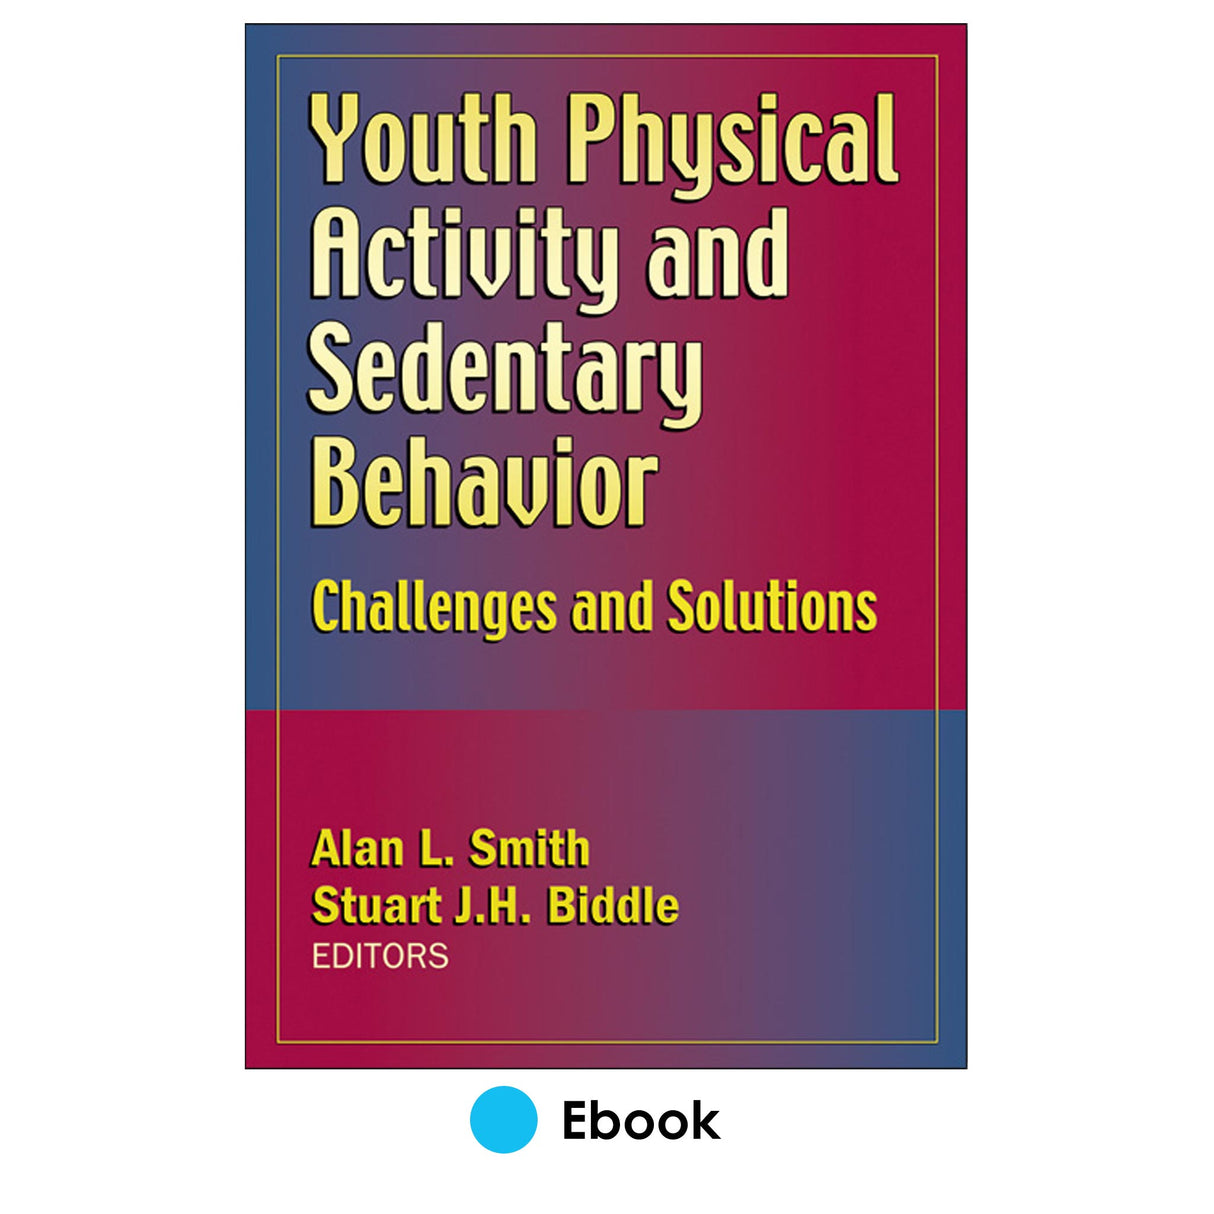 Youth Physical Activity and Sedentary Behavior PDF